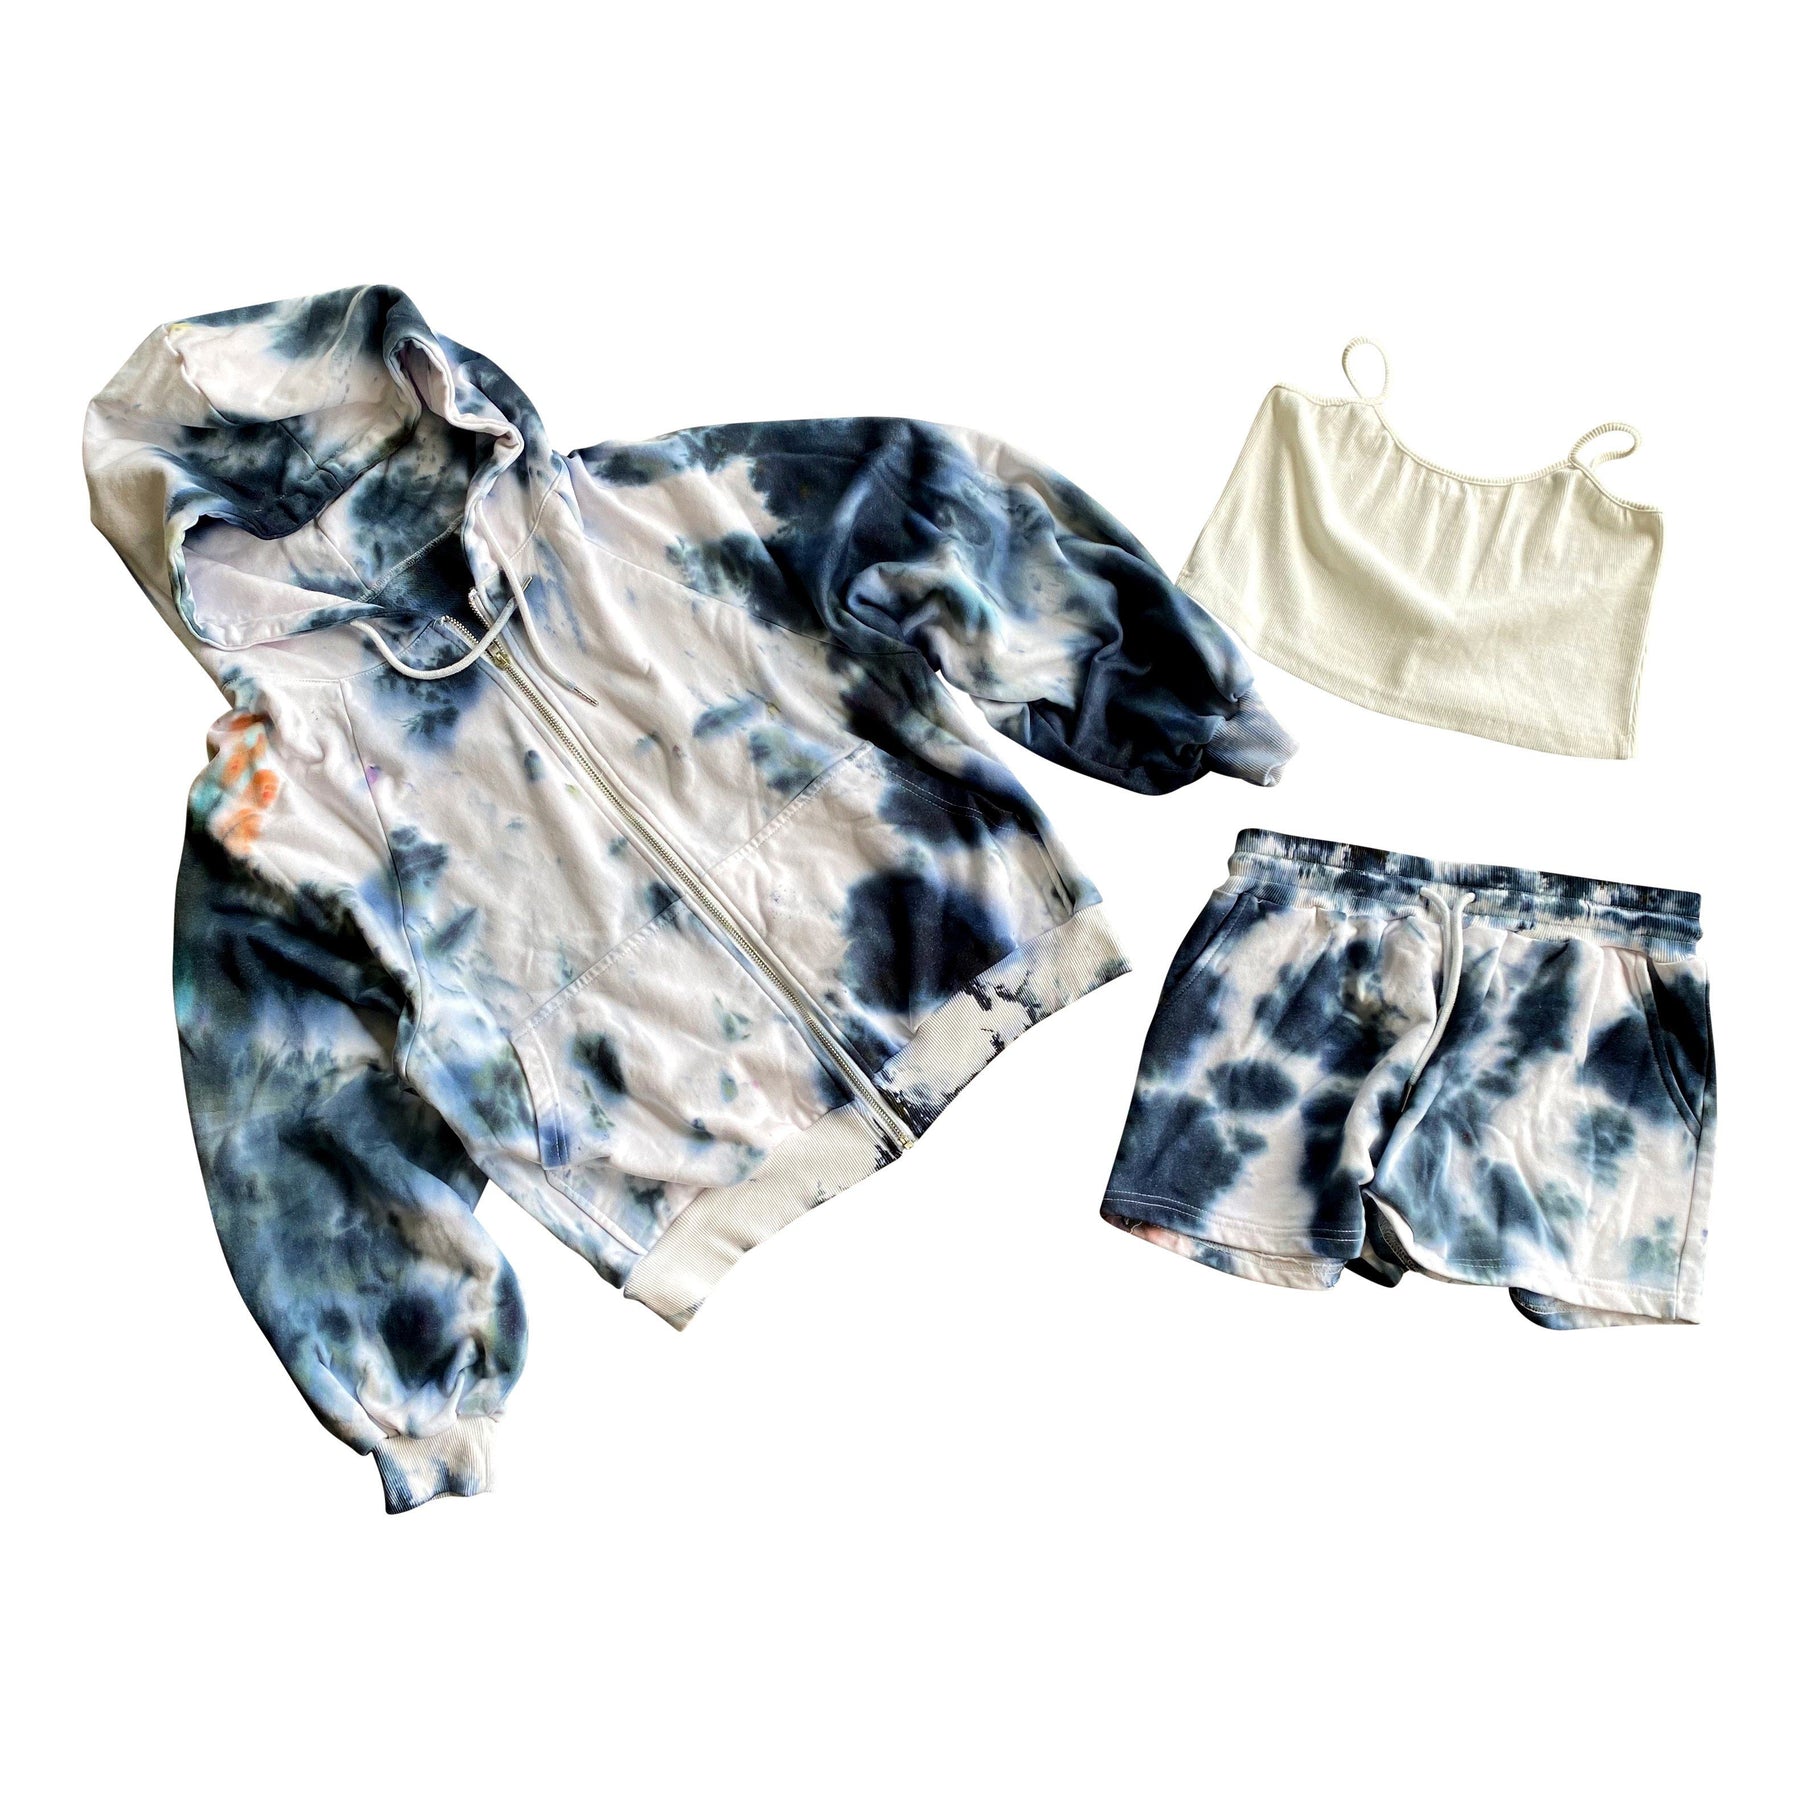 Zip up hoodie, shorts and a little crop top set. Tie Dyed with black dye. Signed @wrenandglory.